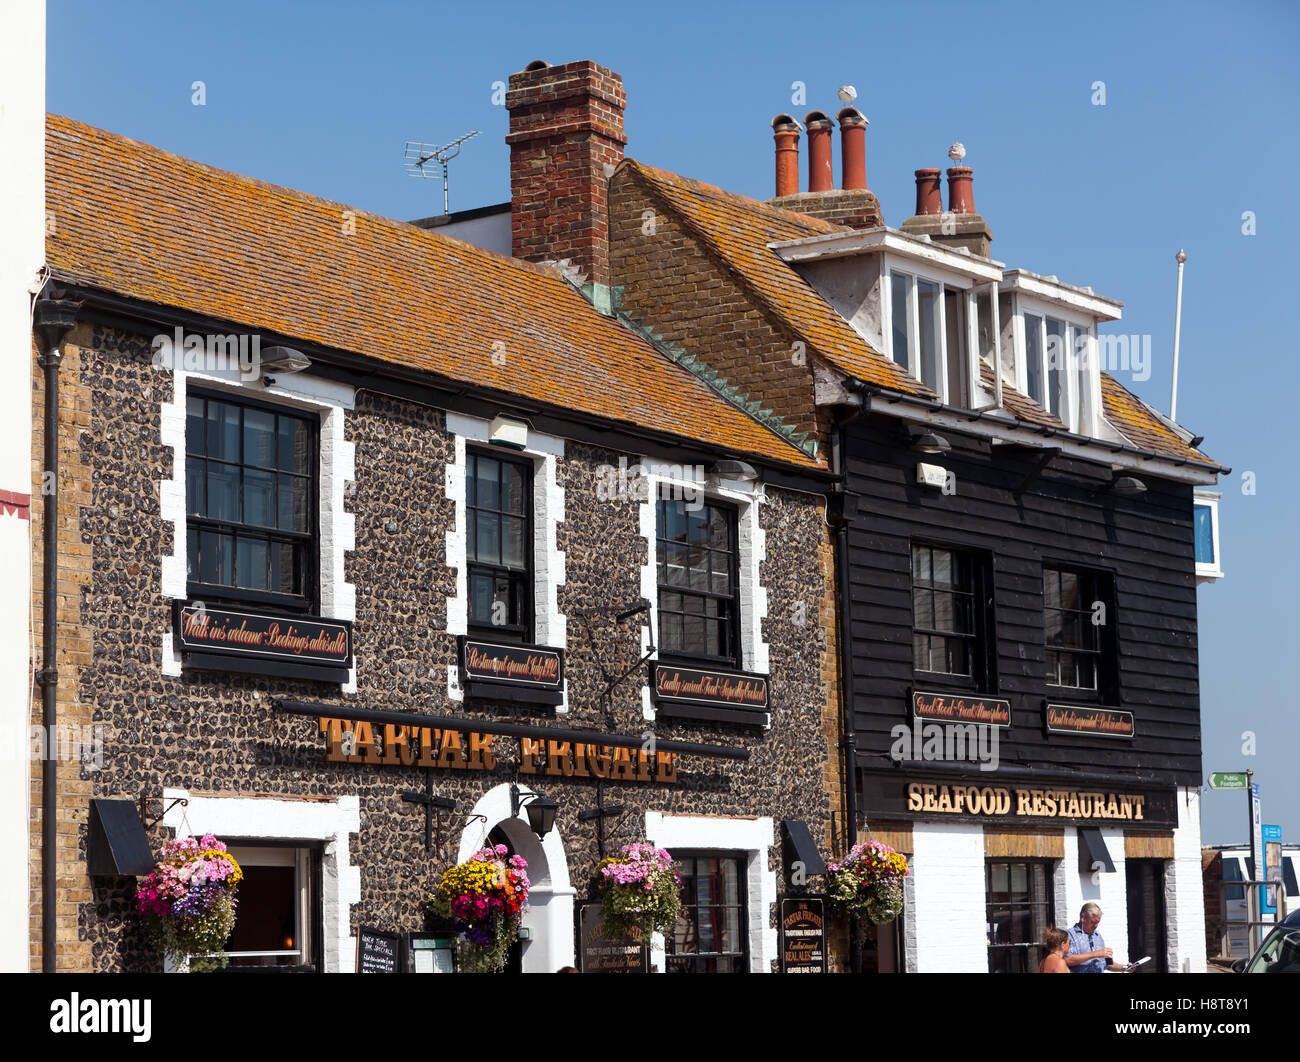 View of the 'Tartar Frigate' a historic, 18th century flint seafood restaurant on the sea front in Broadstairs, Kent. Stock Photo